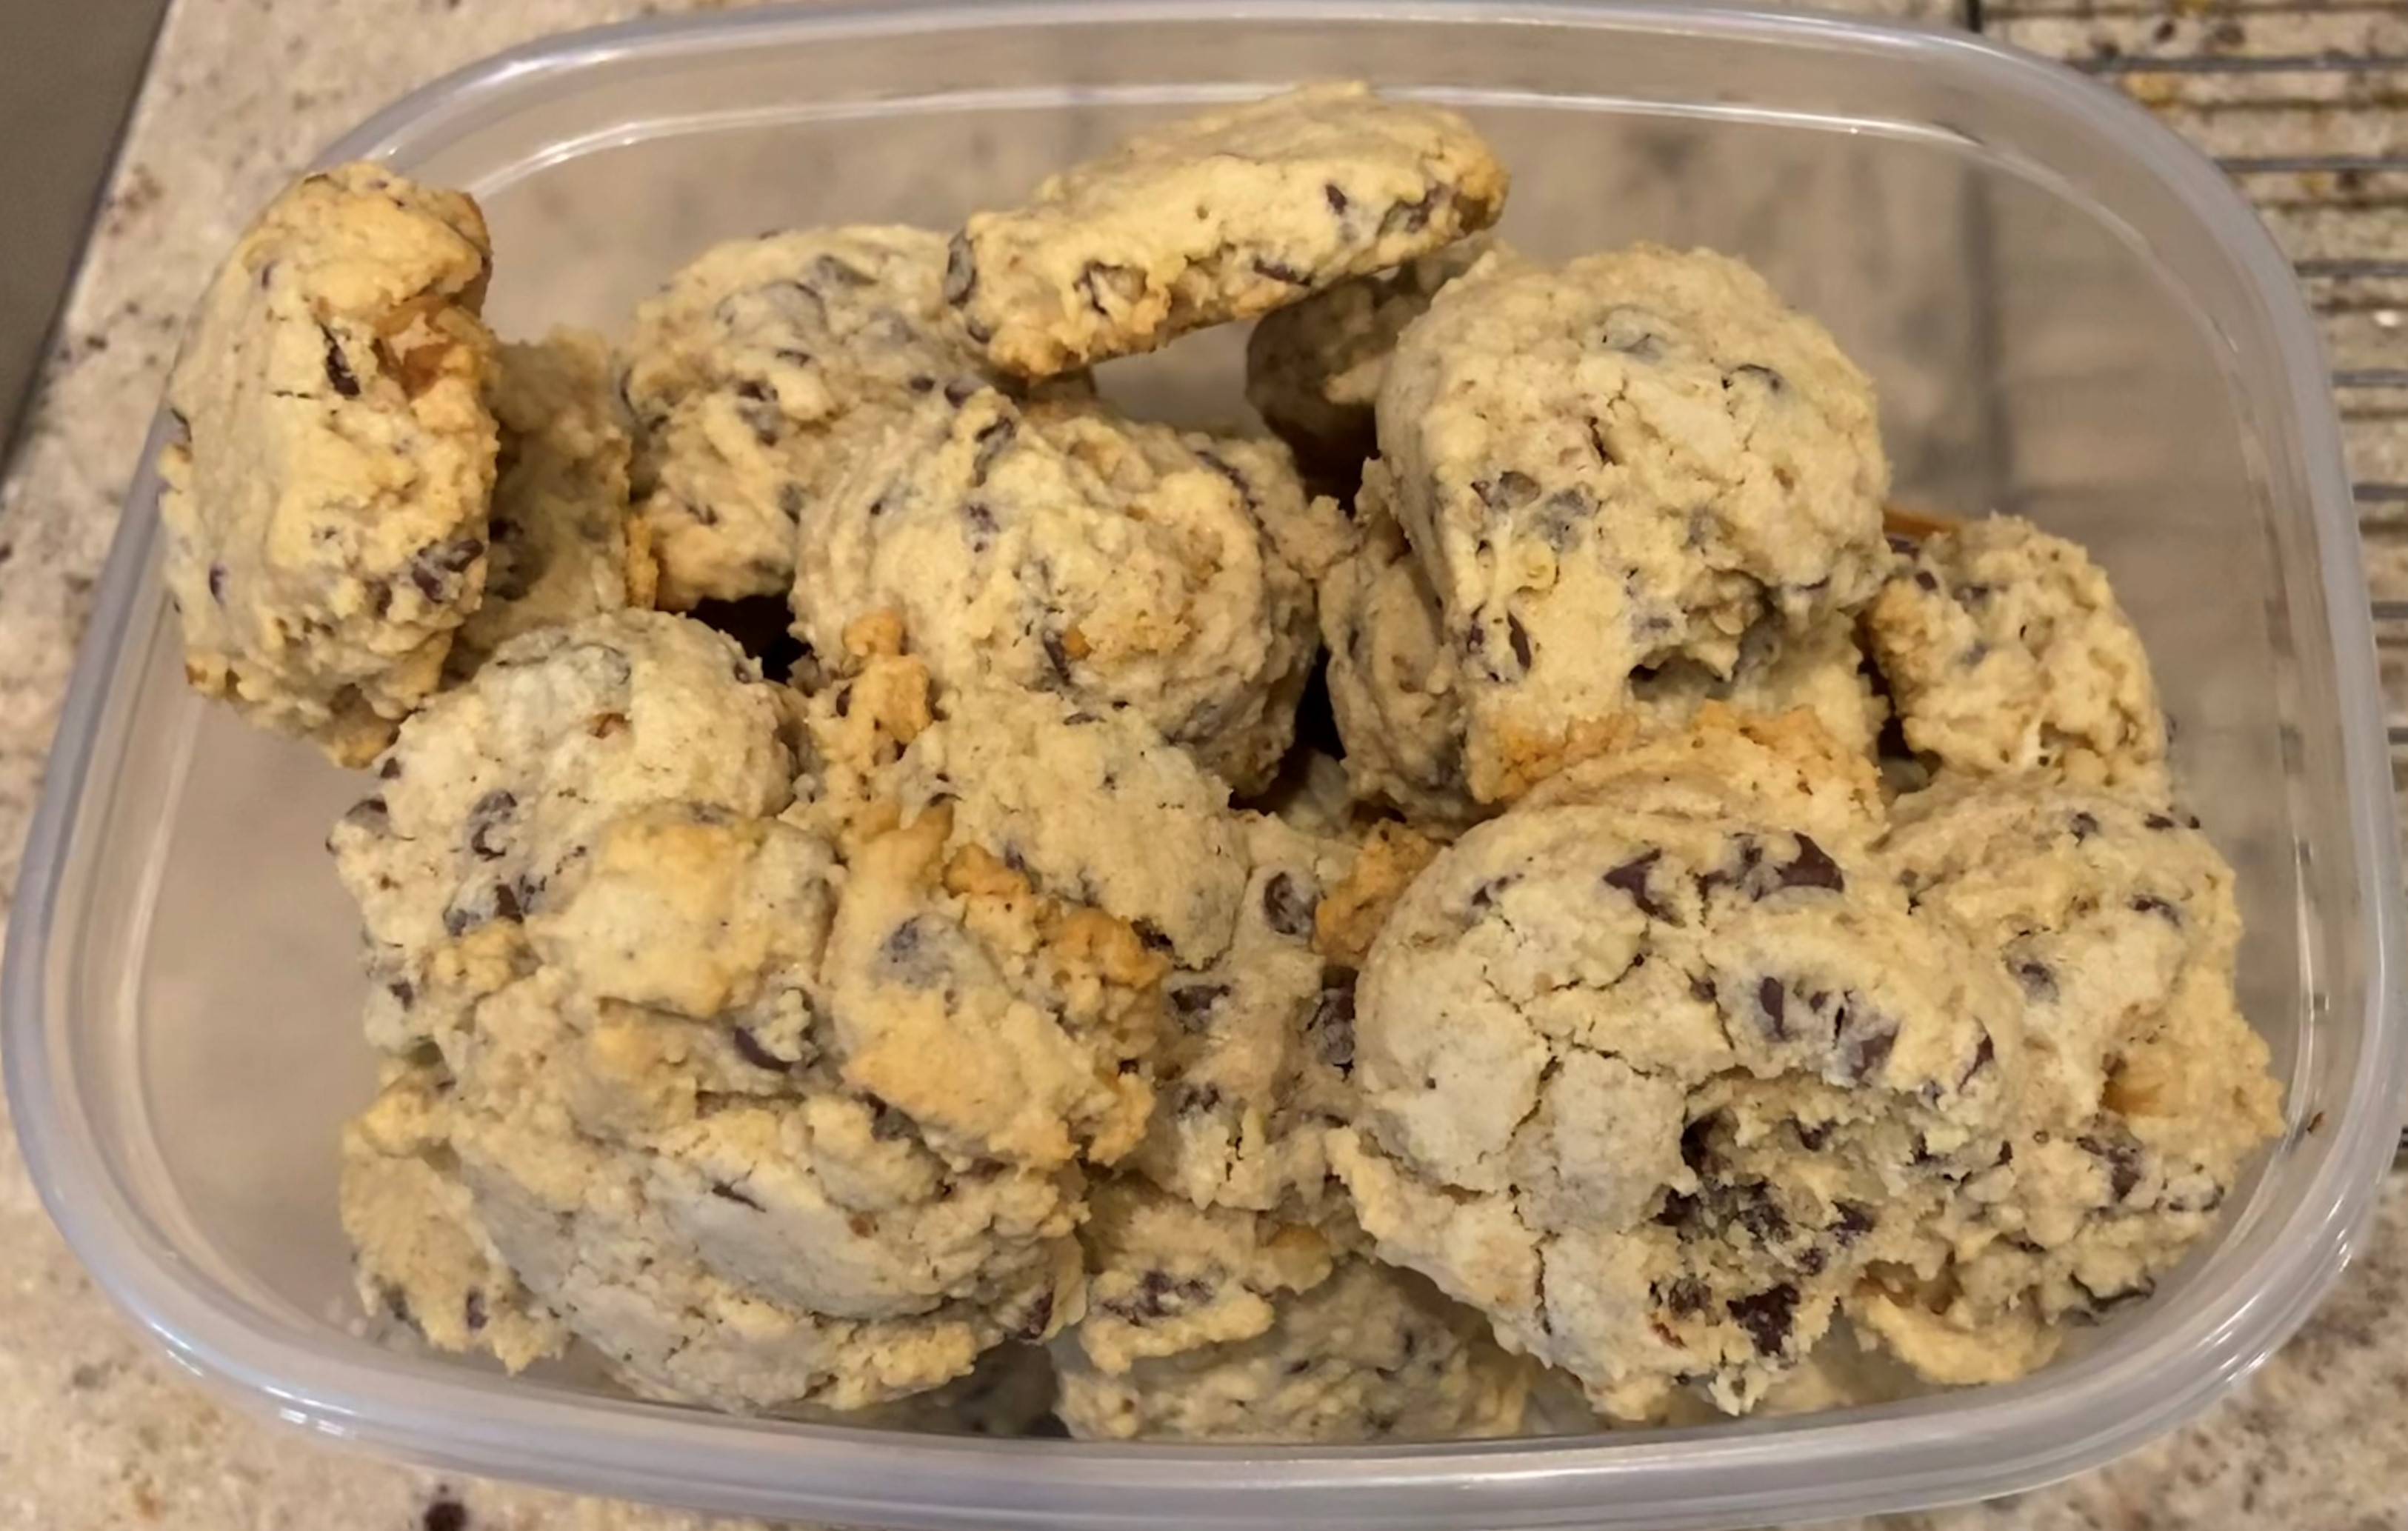 Irresistible Passover Chocolate Chip Cookies!